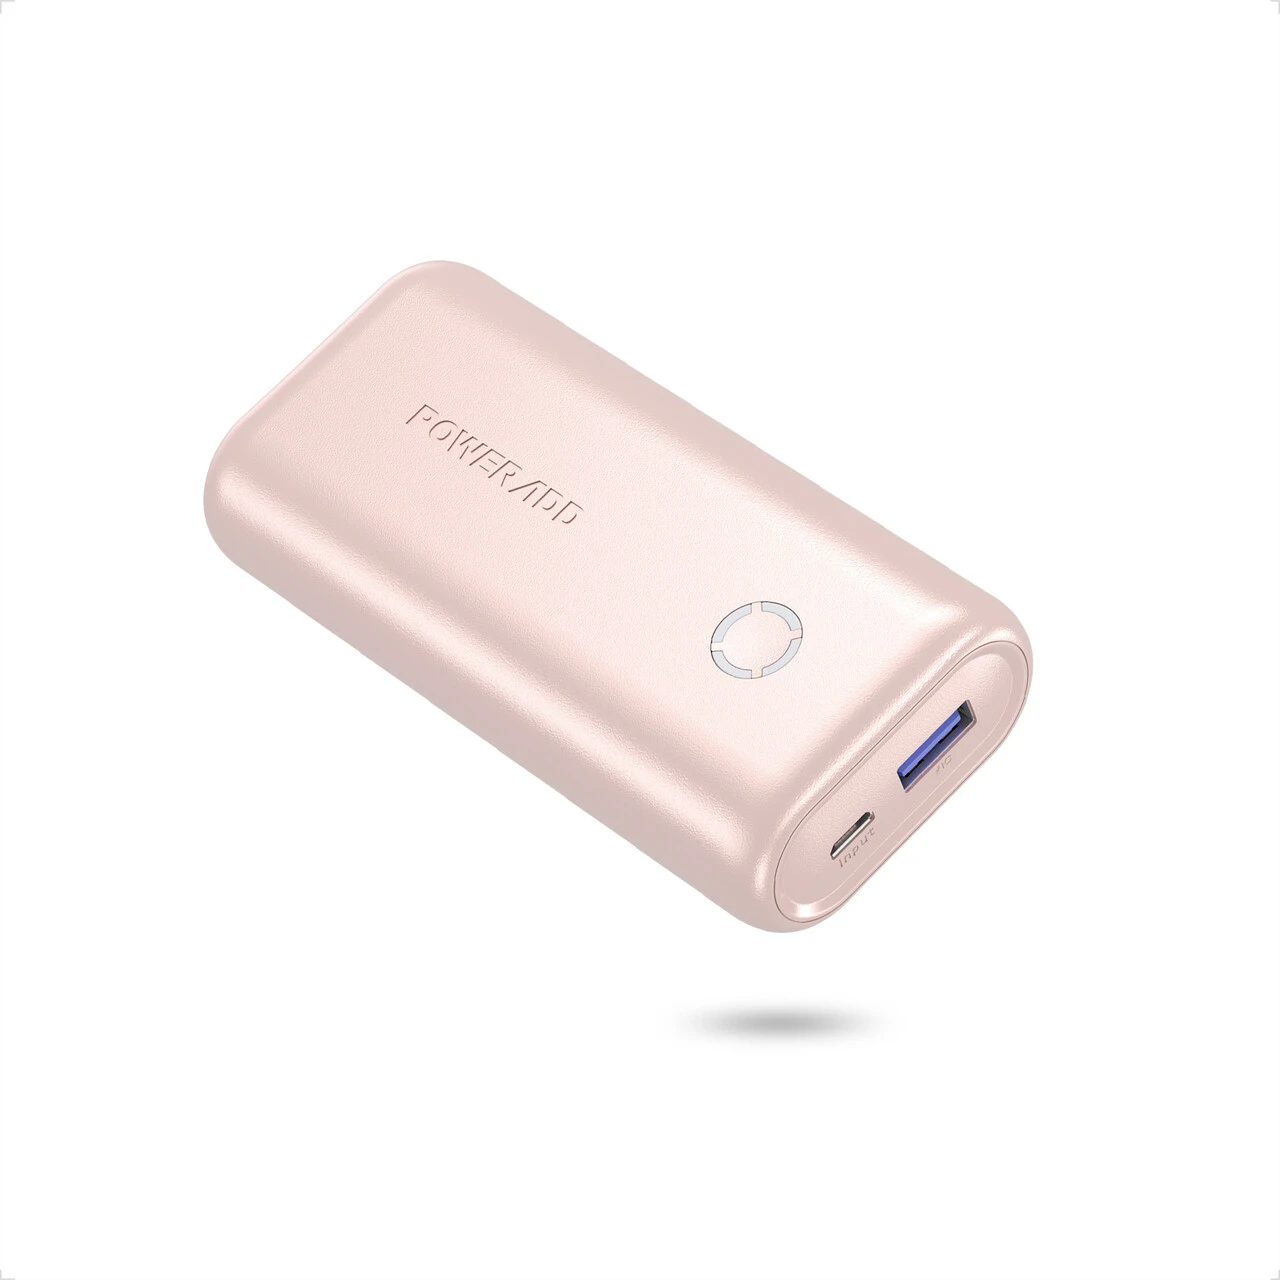 Poweradd New Pink Color Mini Energycell 2.4A Output Power Bank 10000mAh